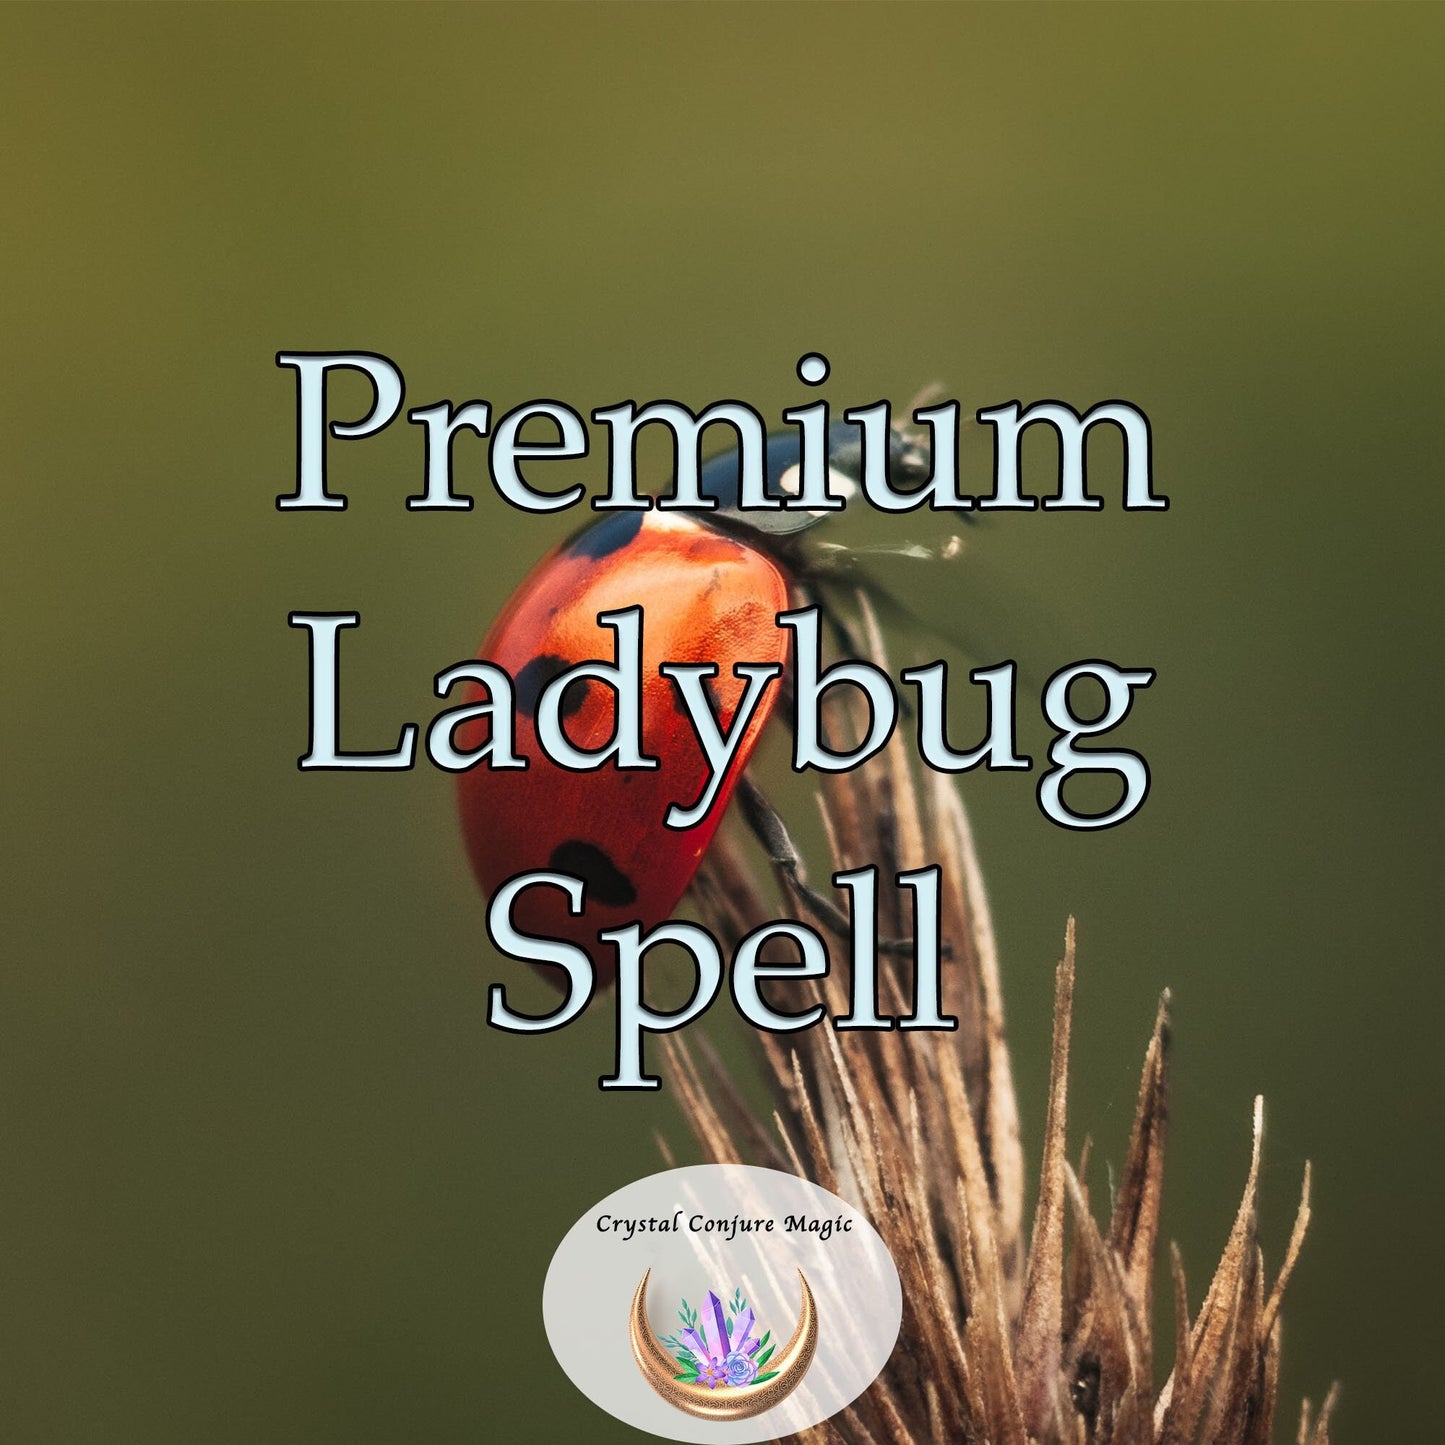 Premium Ladybug Spell - an enchantment to infuse your life with good fortune, protection, and healing and guide you towards the right path